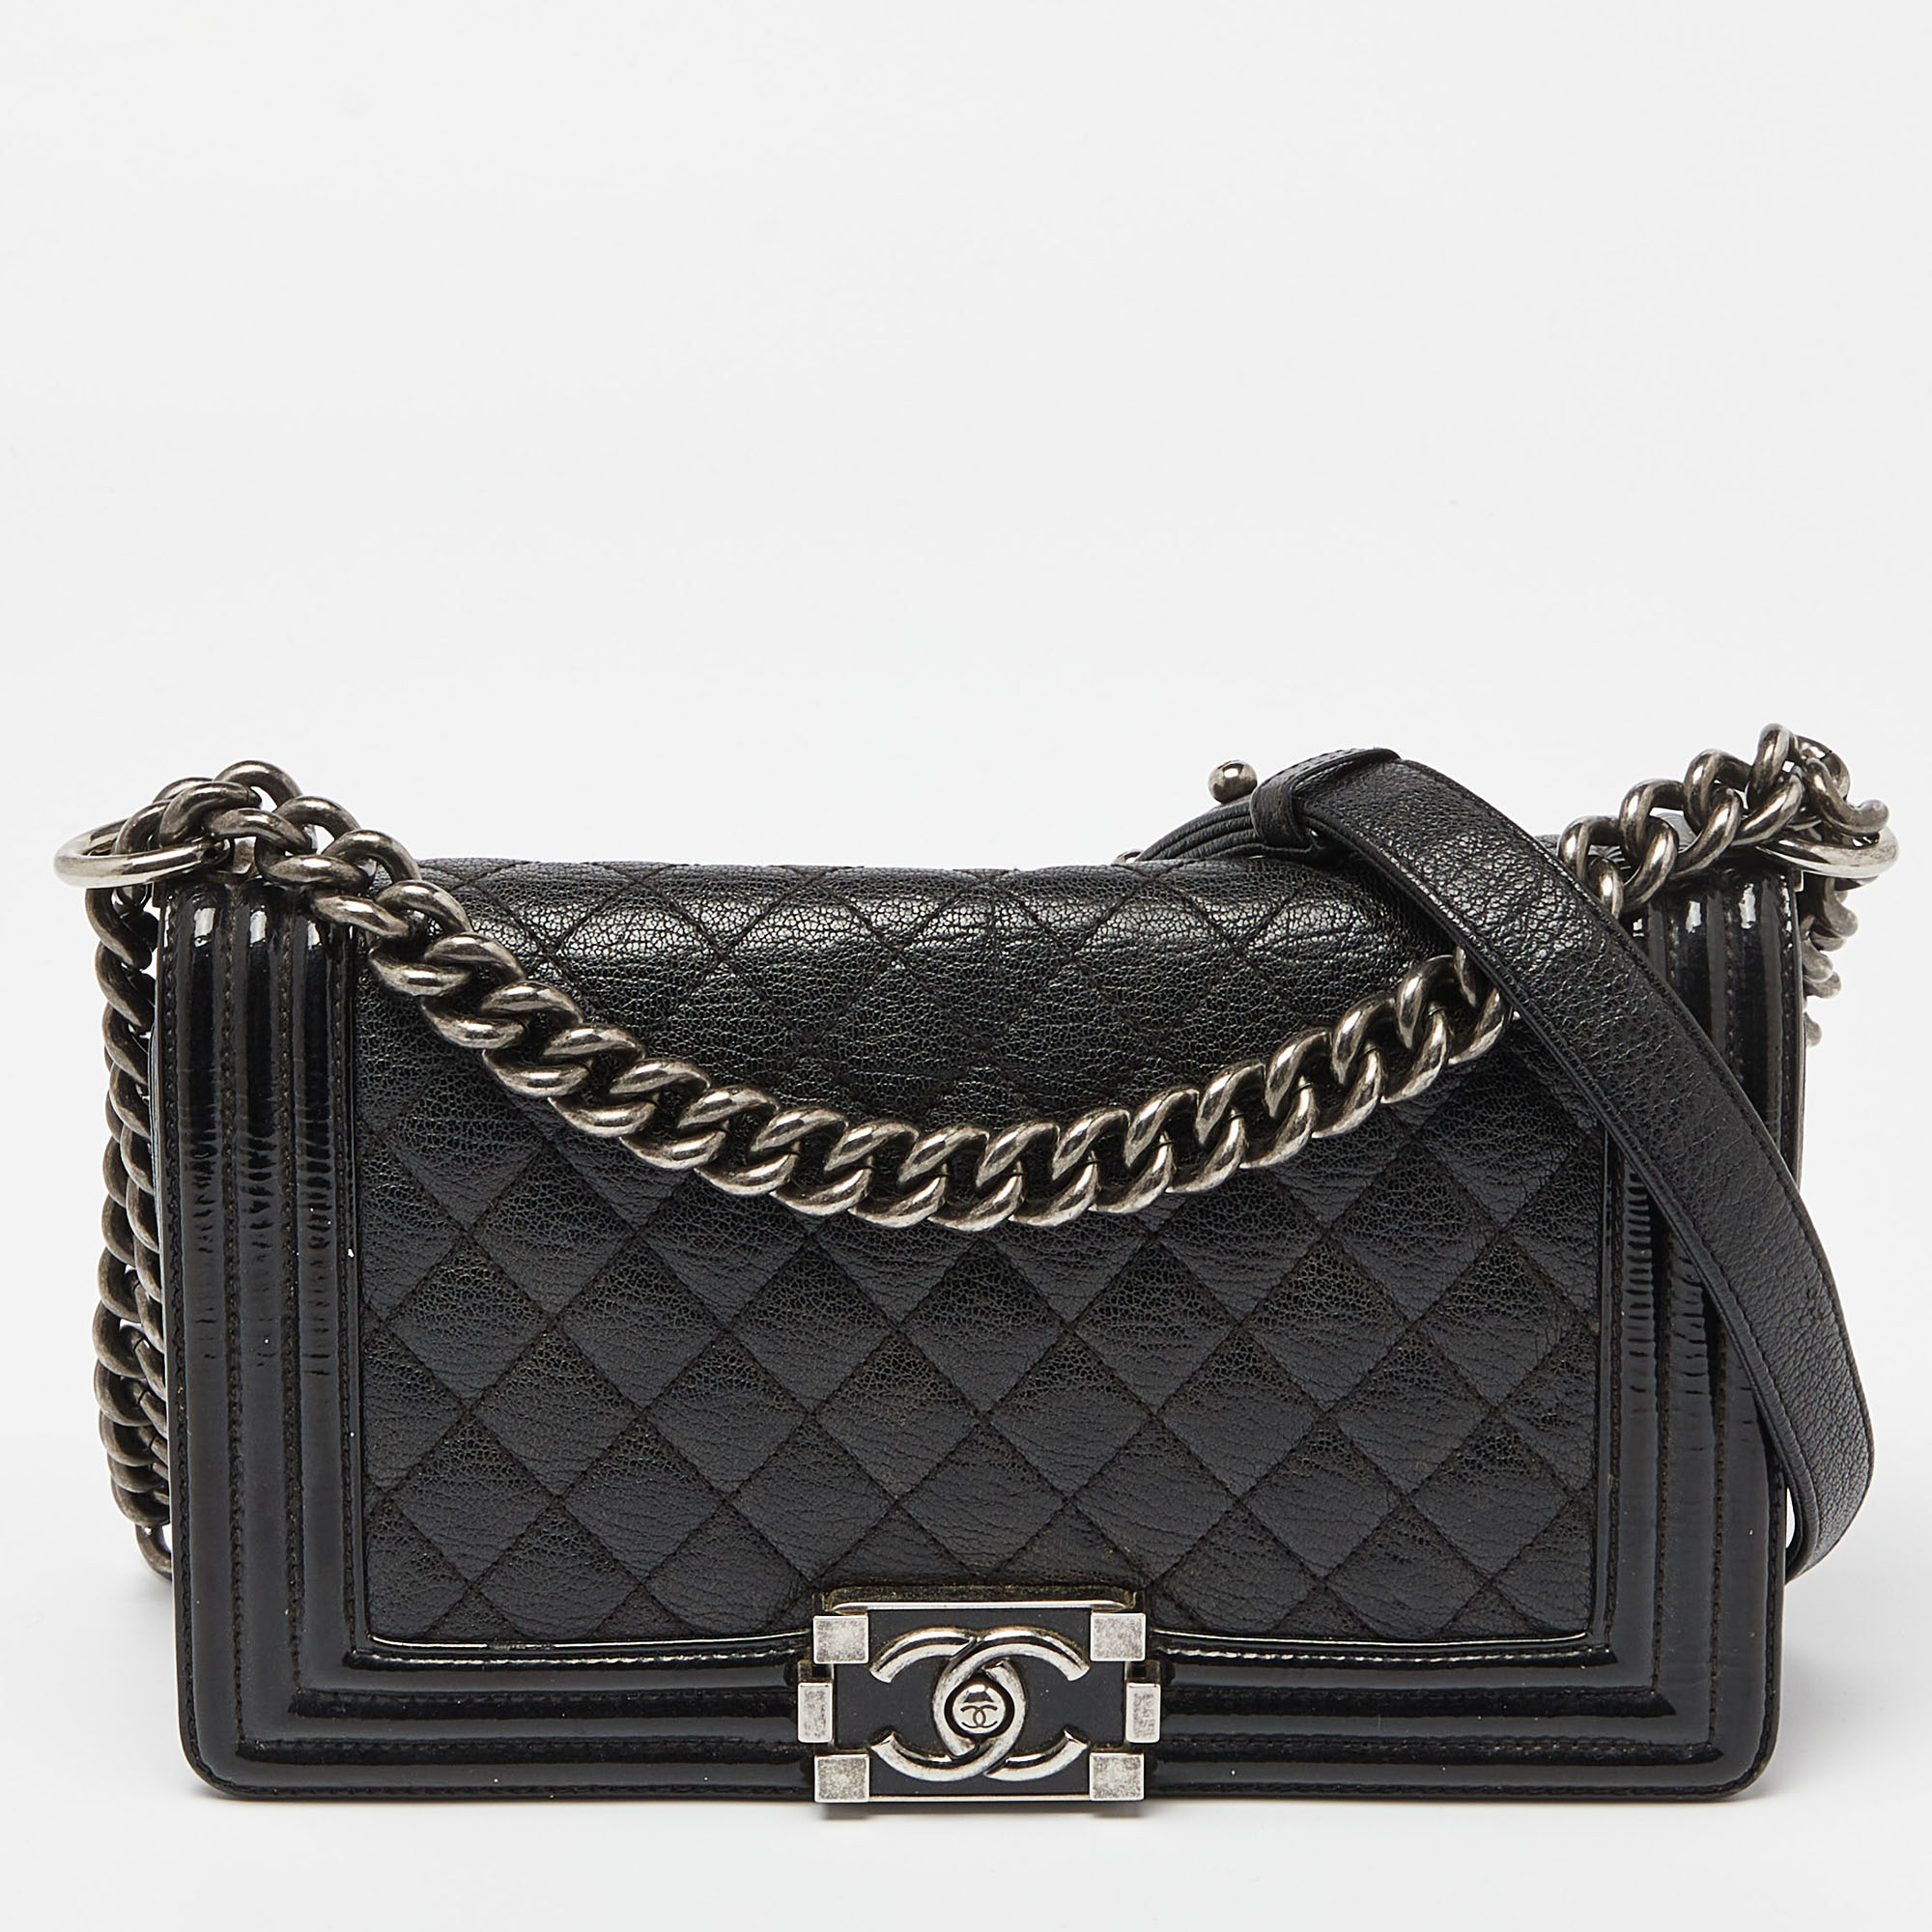 

Chanel Black Quilted Patent and Leather Medium Boy Flap Bag